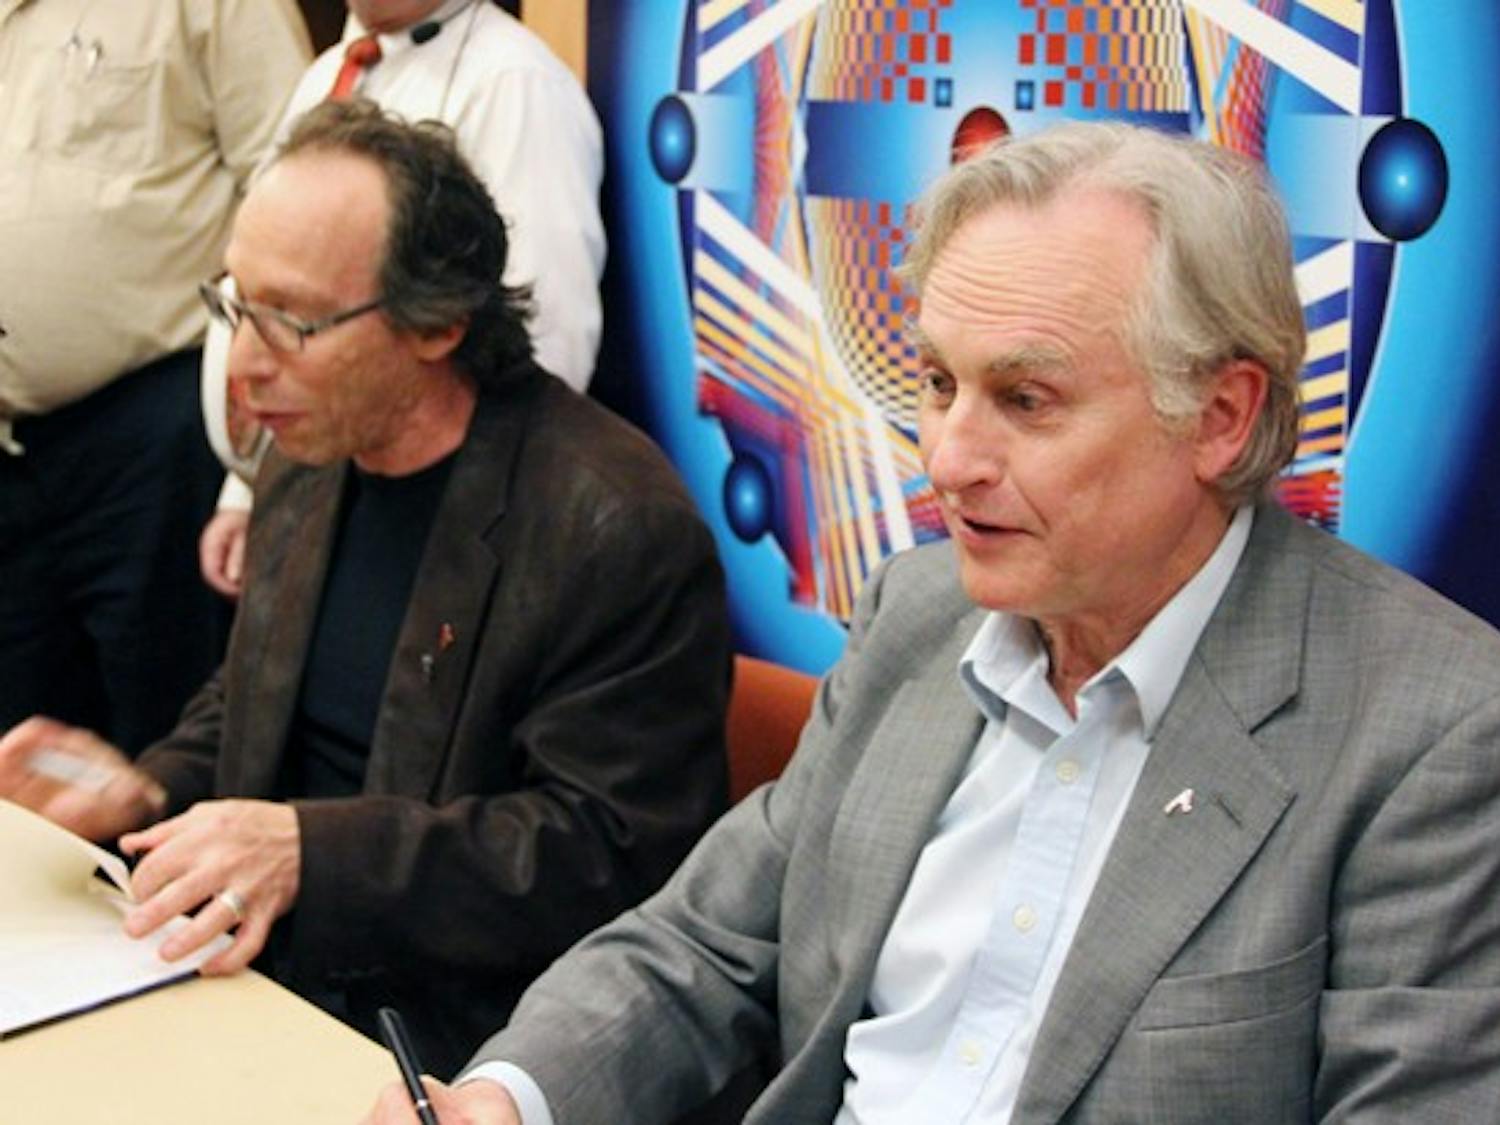 Richard Dawkins, right, and Lawrence Krauss, left, sign books at the "Something From Nothing?" event. (Photo by Diana Lustig)